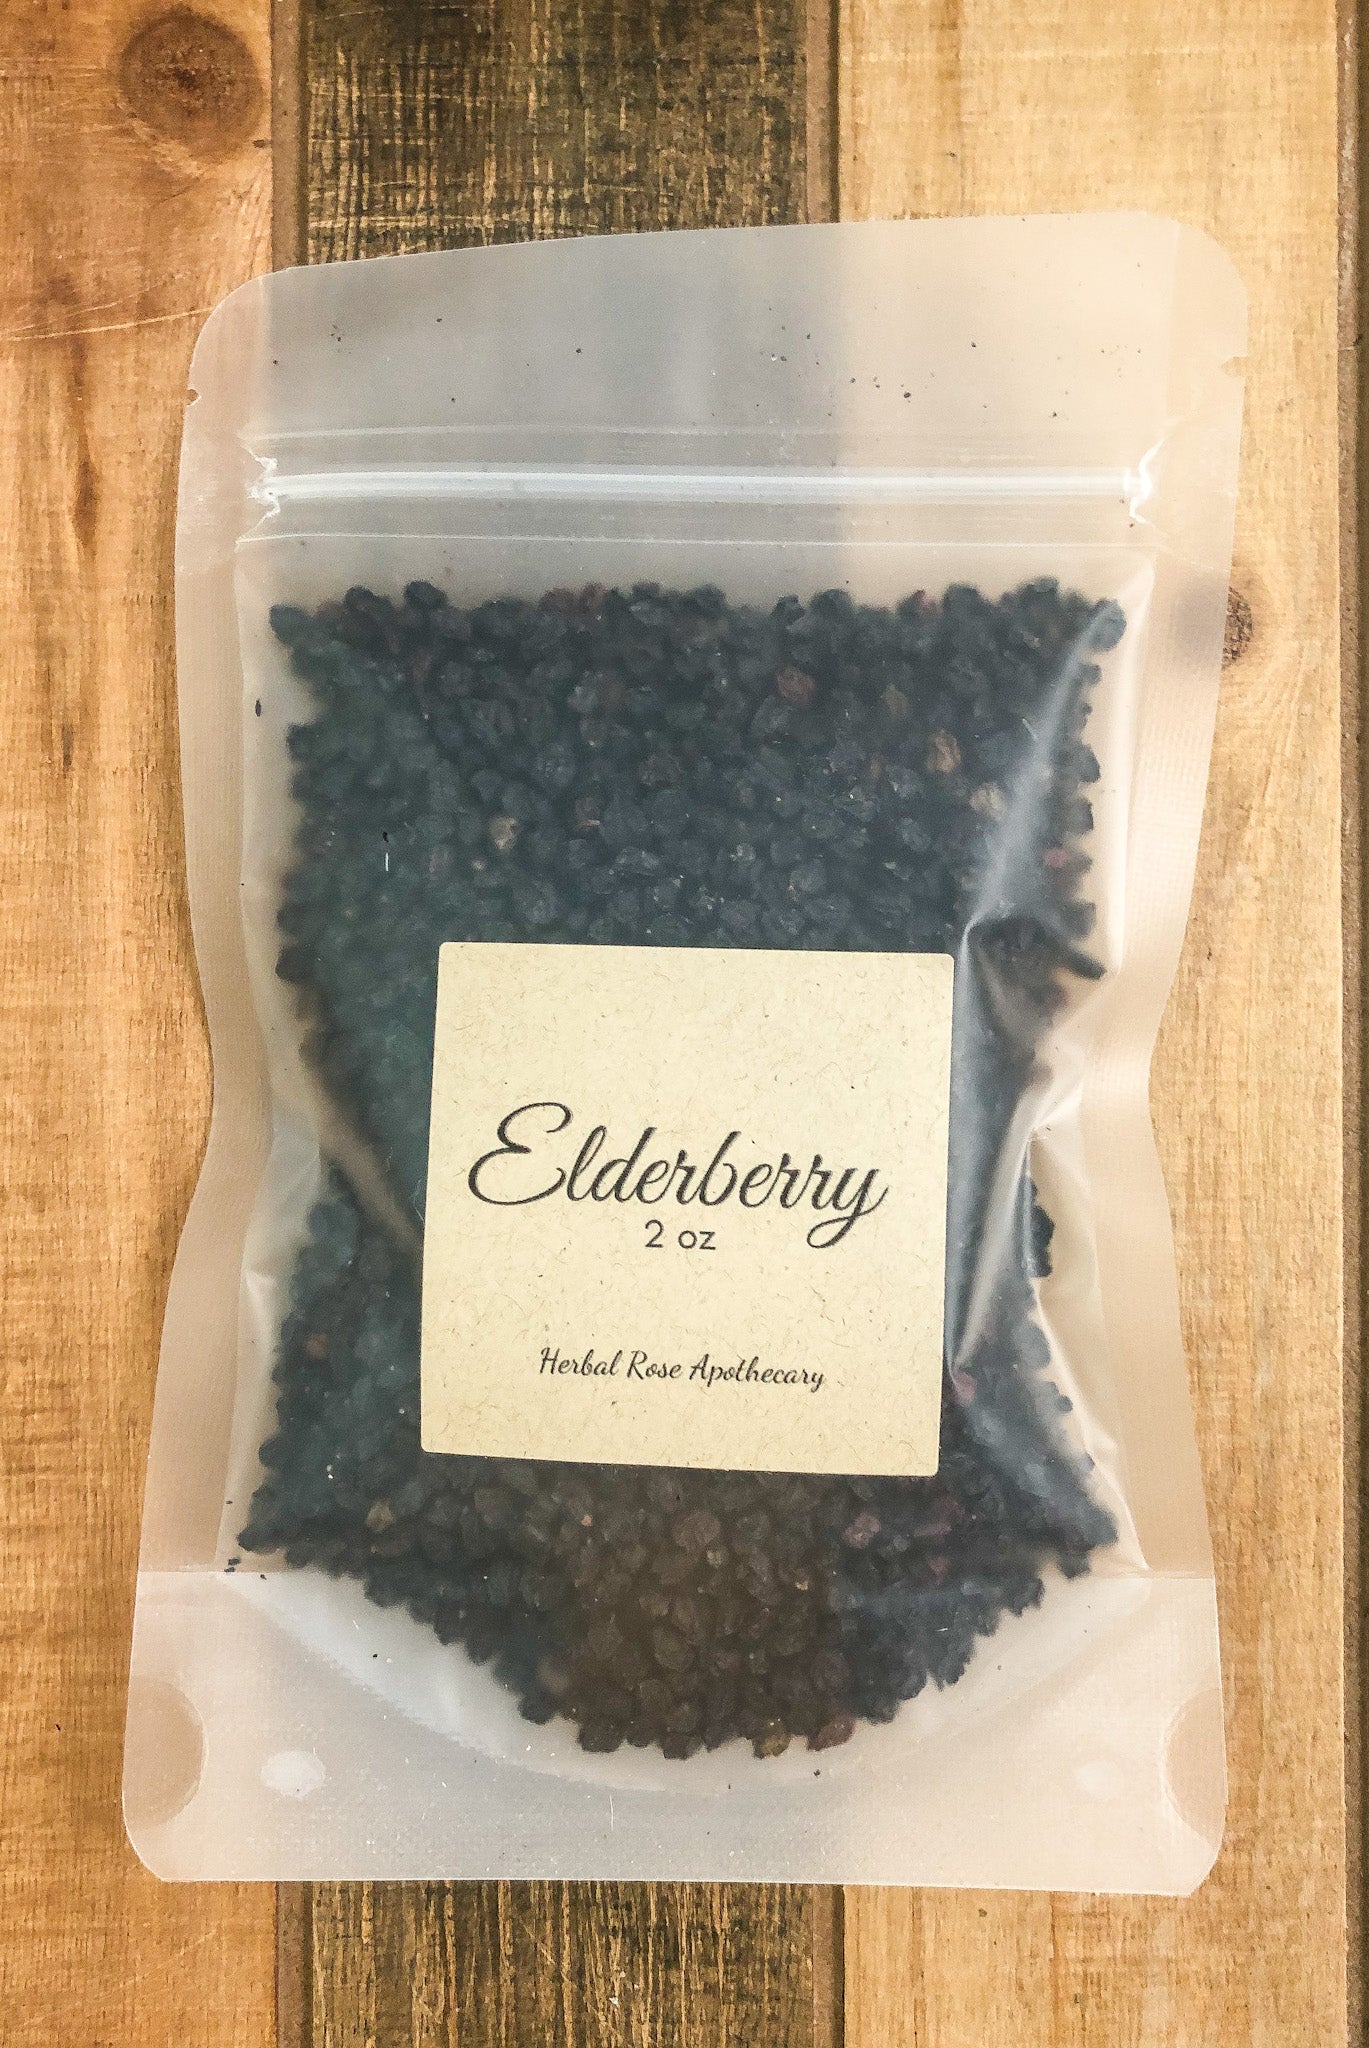 2oz bag of dried elderberries in a clear plastic bag with a wooden background